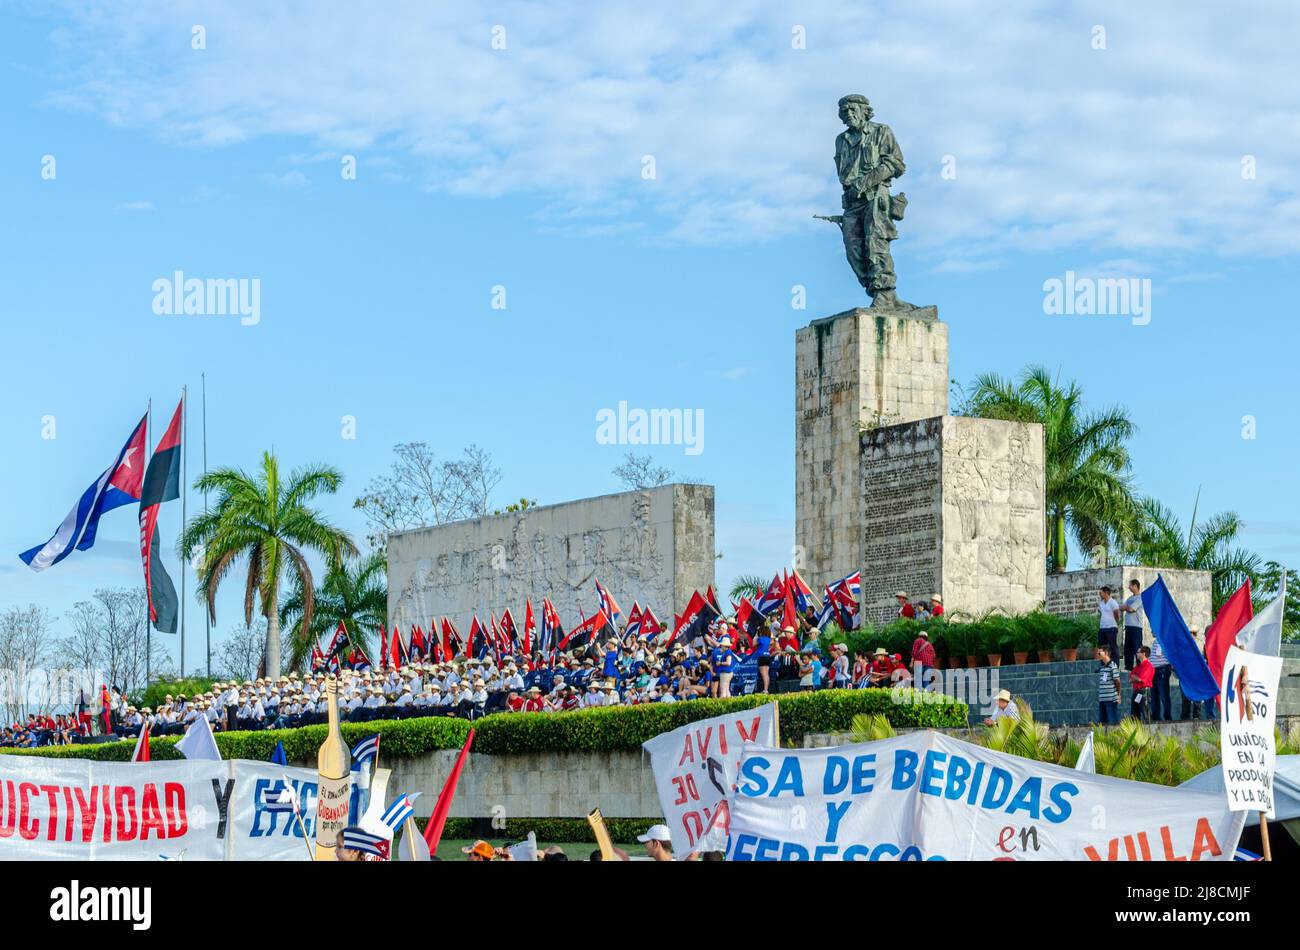 Banners from diverse business crossing the main tribune. The traditional May Day or Workers Day celebrations are held annually in the Che Guevara Revo Stock Photo